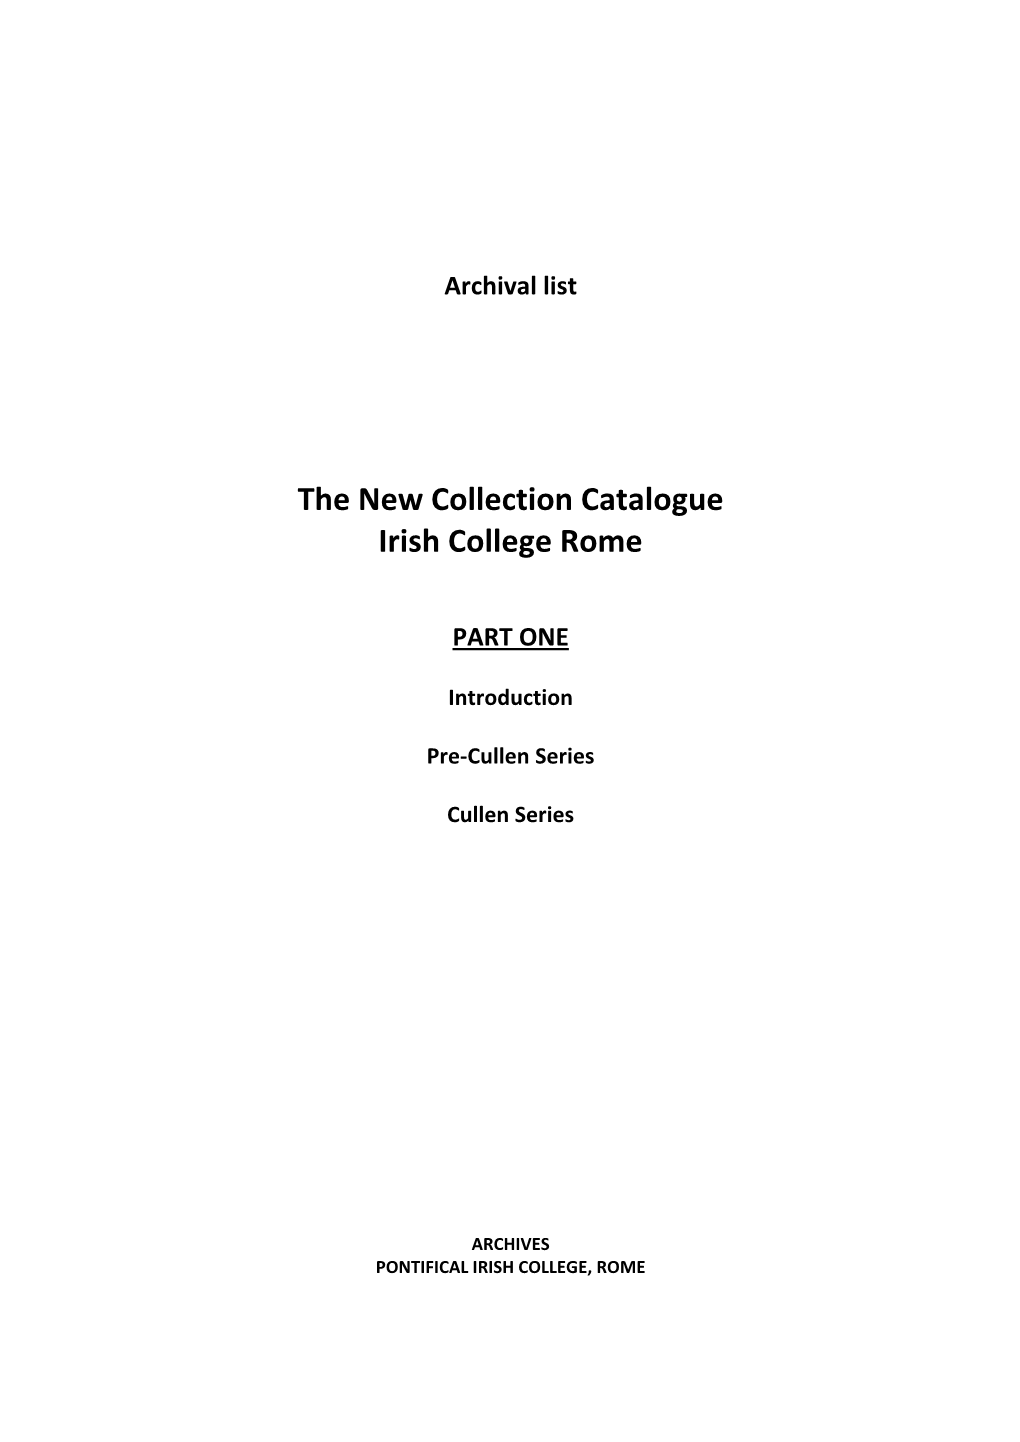 The New Collection Catalogue Irish College Rome